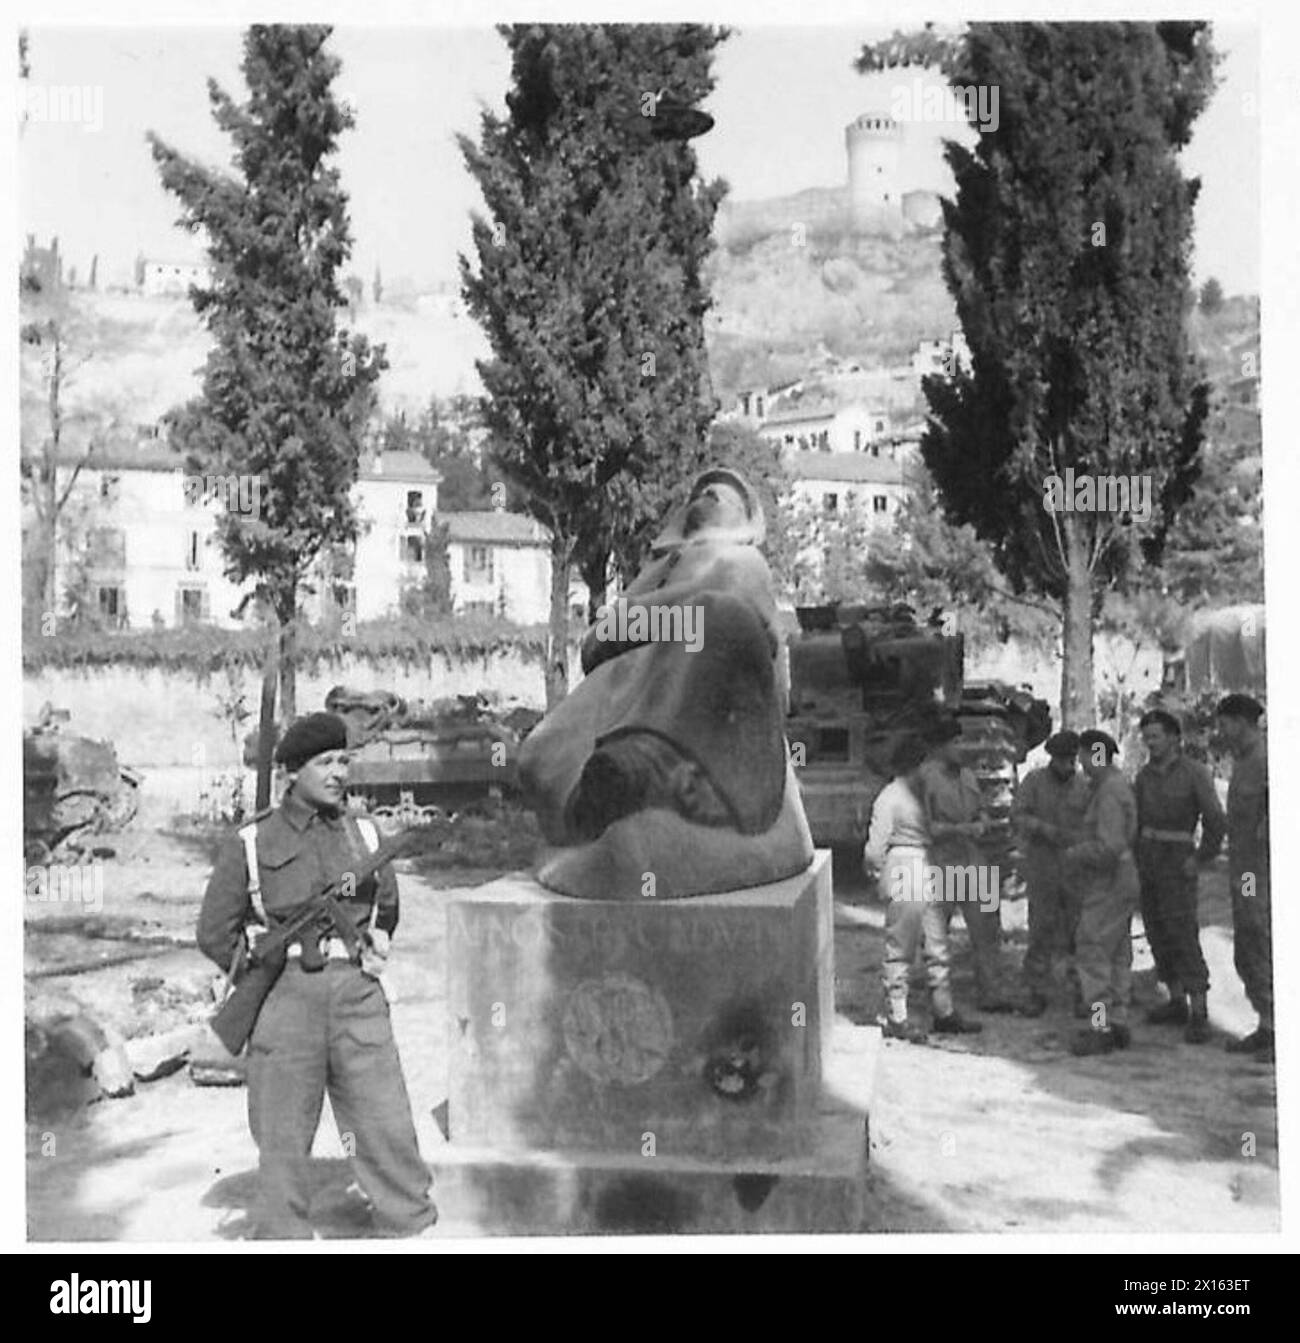 EIGHTH ARMY : VARIOUS - Tpr. William Parker of 16 Hampton-Dunscroft Road, Doncaster, Yorks, stands beside the War Memorial at Brisighella as he guards the tank park of 'A' Sqn. 8 Royal Tank Regiment. In the background is the ancient Castello Rocca Di Brisighella, built by the Venetians British Army Stock Photo